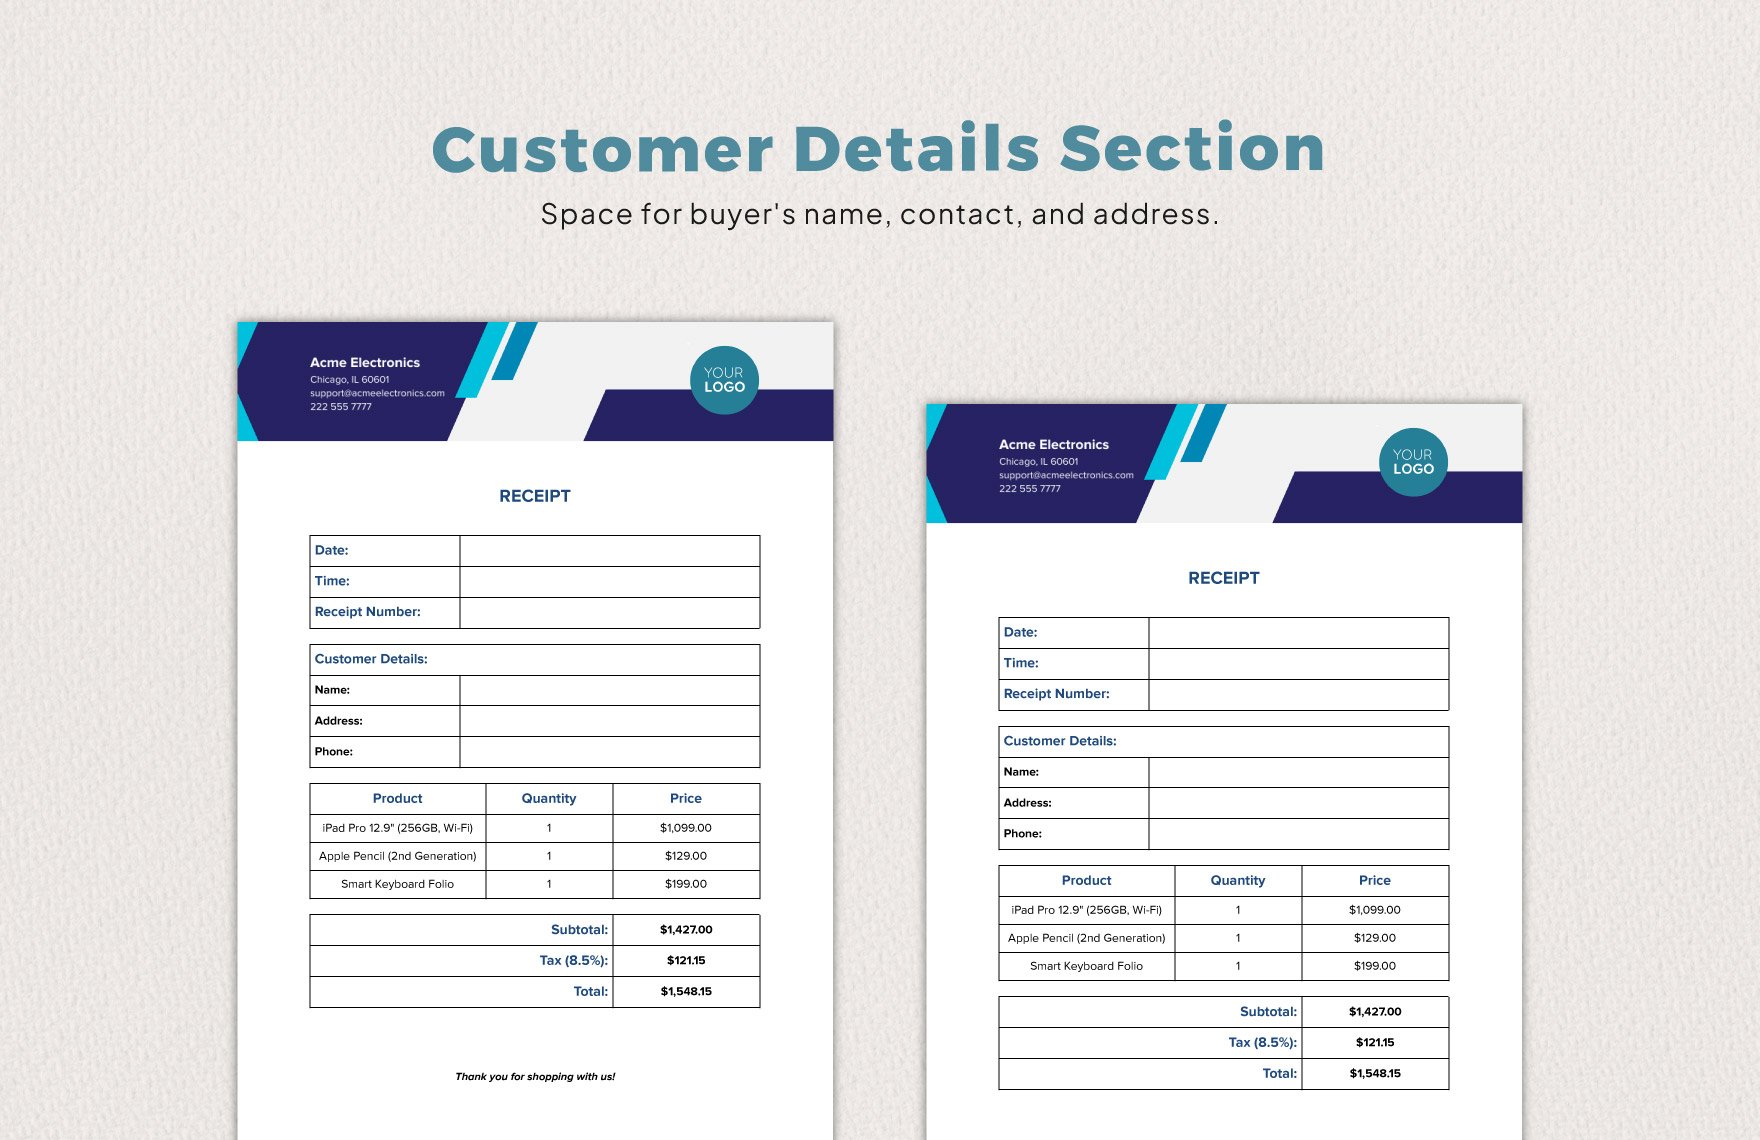 Receipt for iPad Template